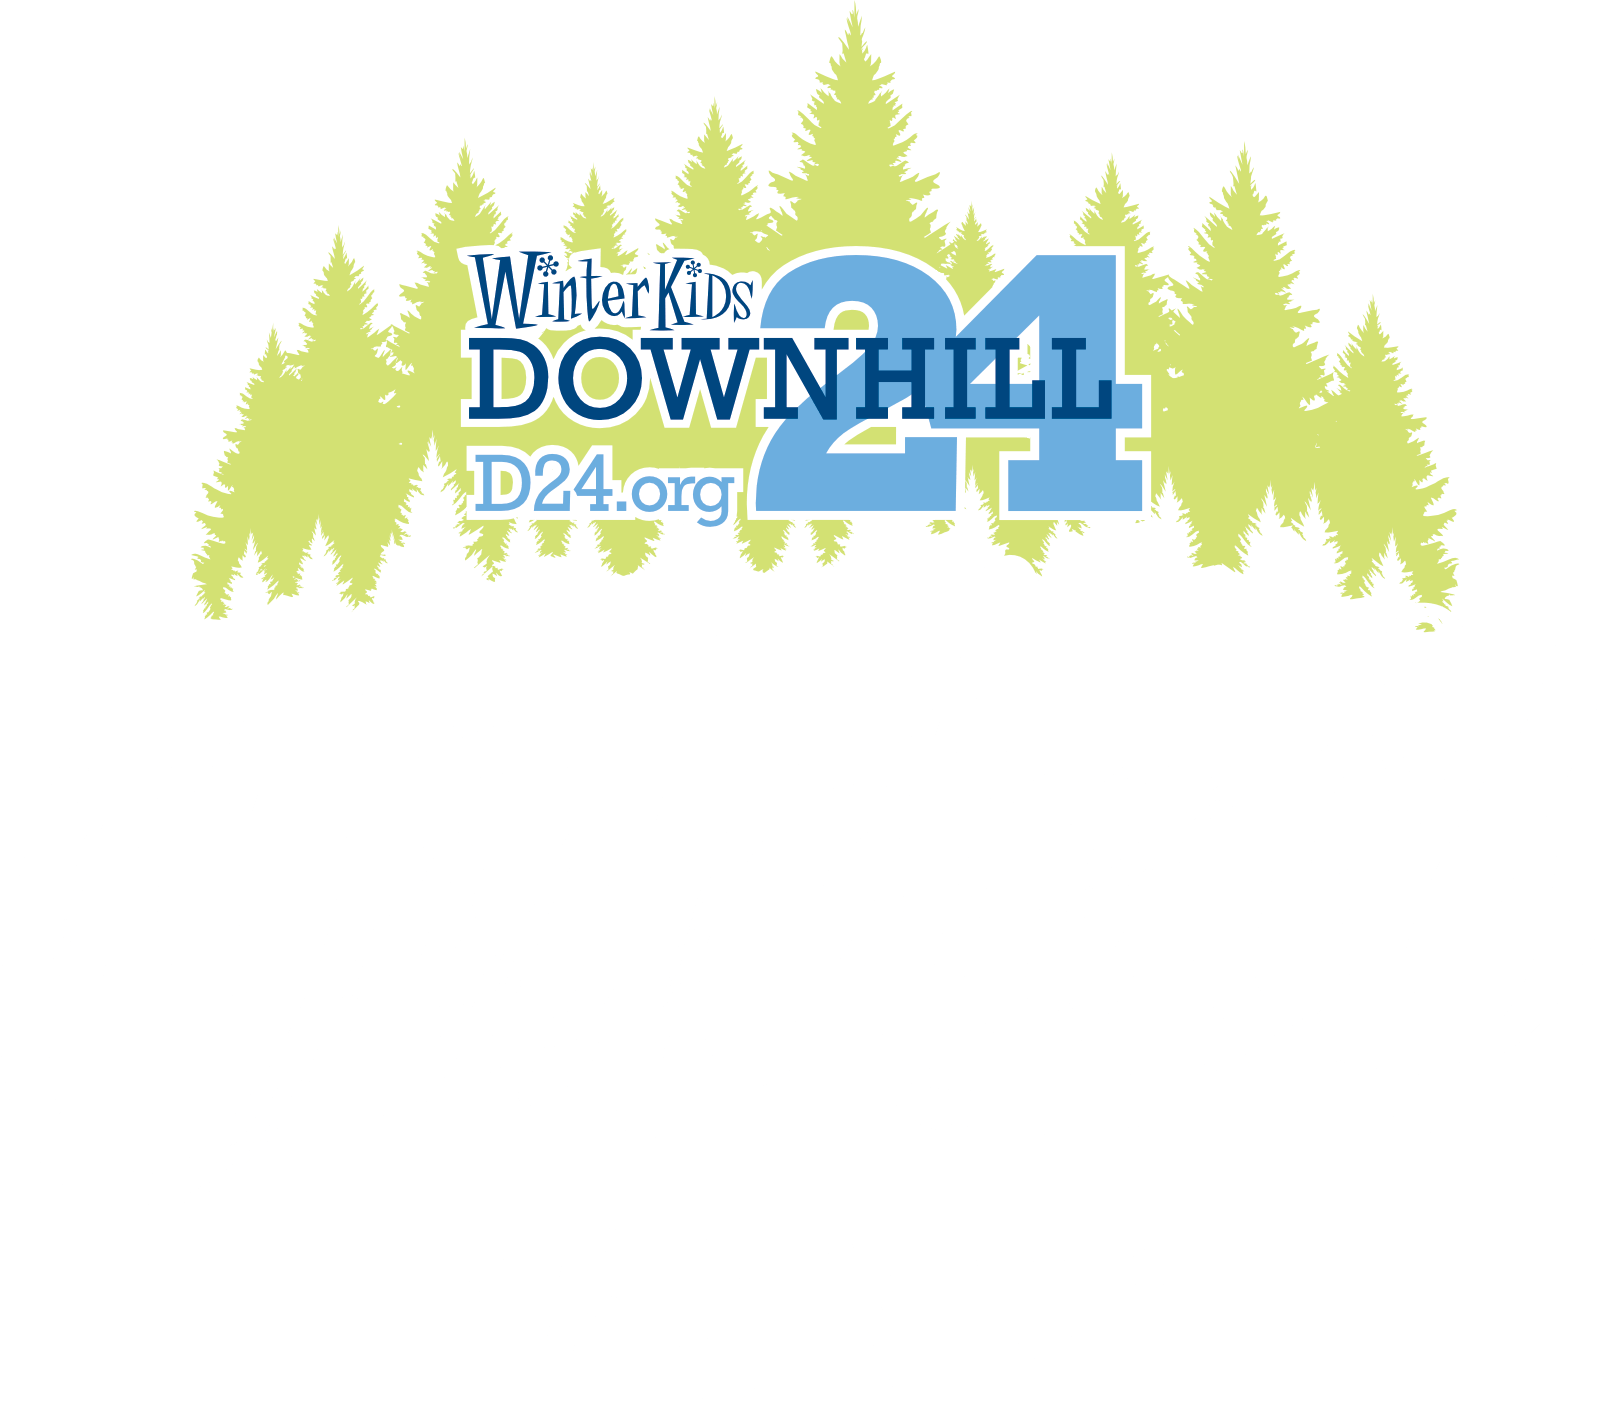 D24 outdoor fund logo white green trees